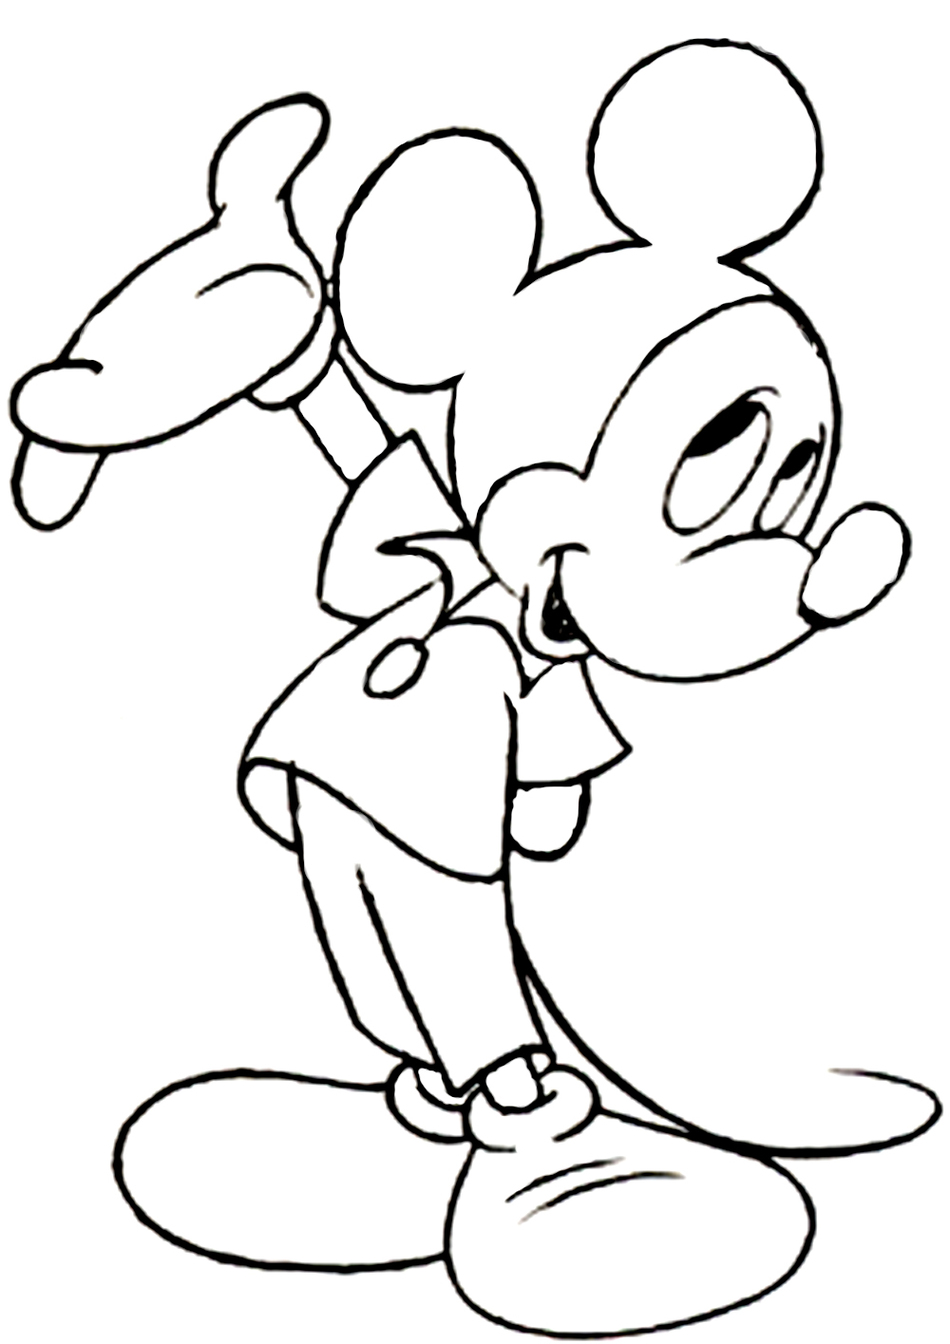 Mickey mouse clip art free .